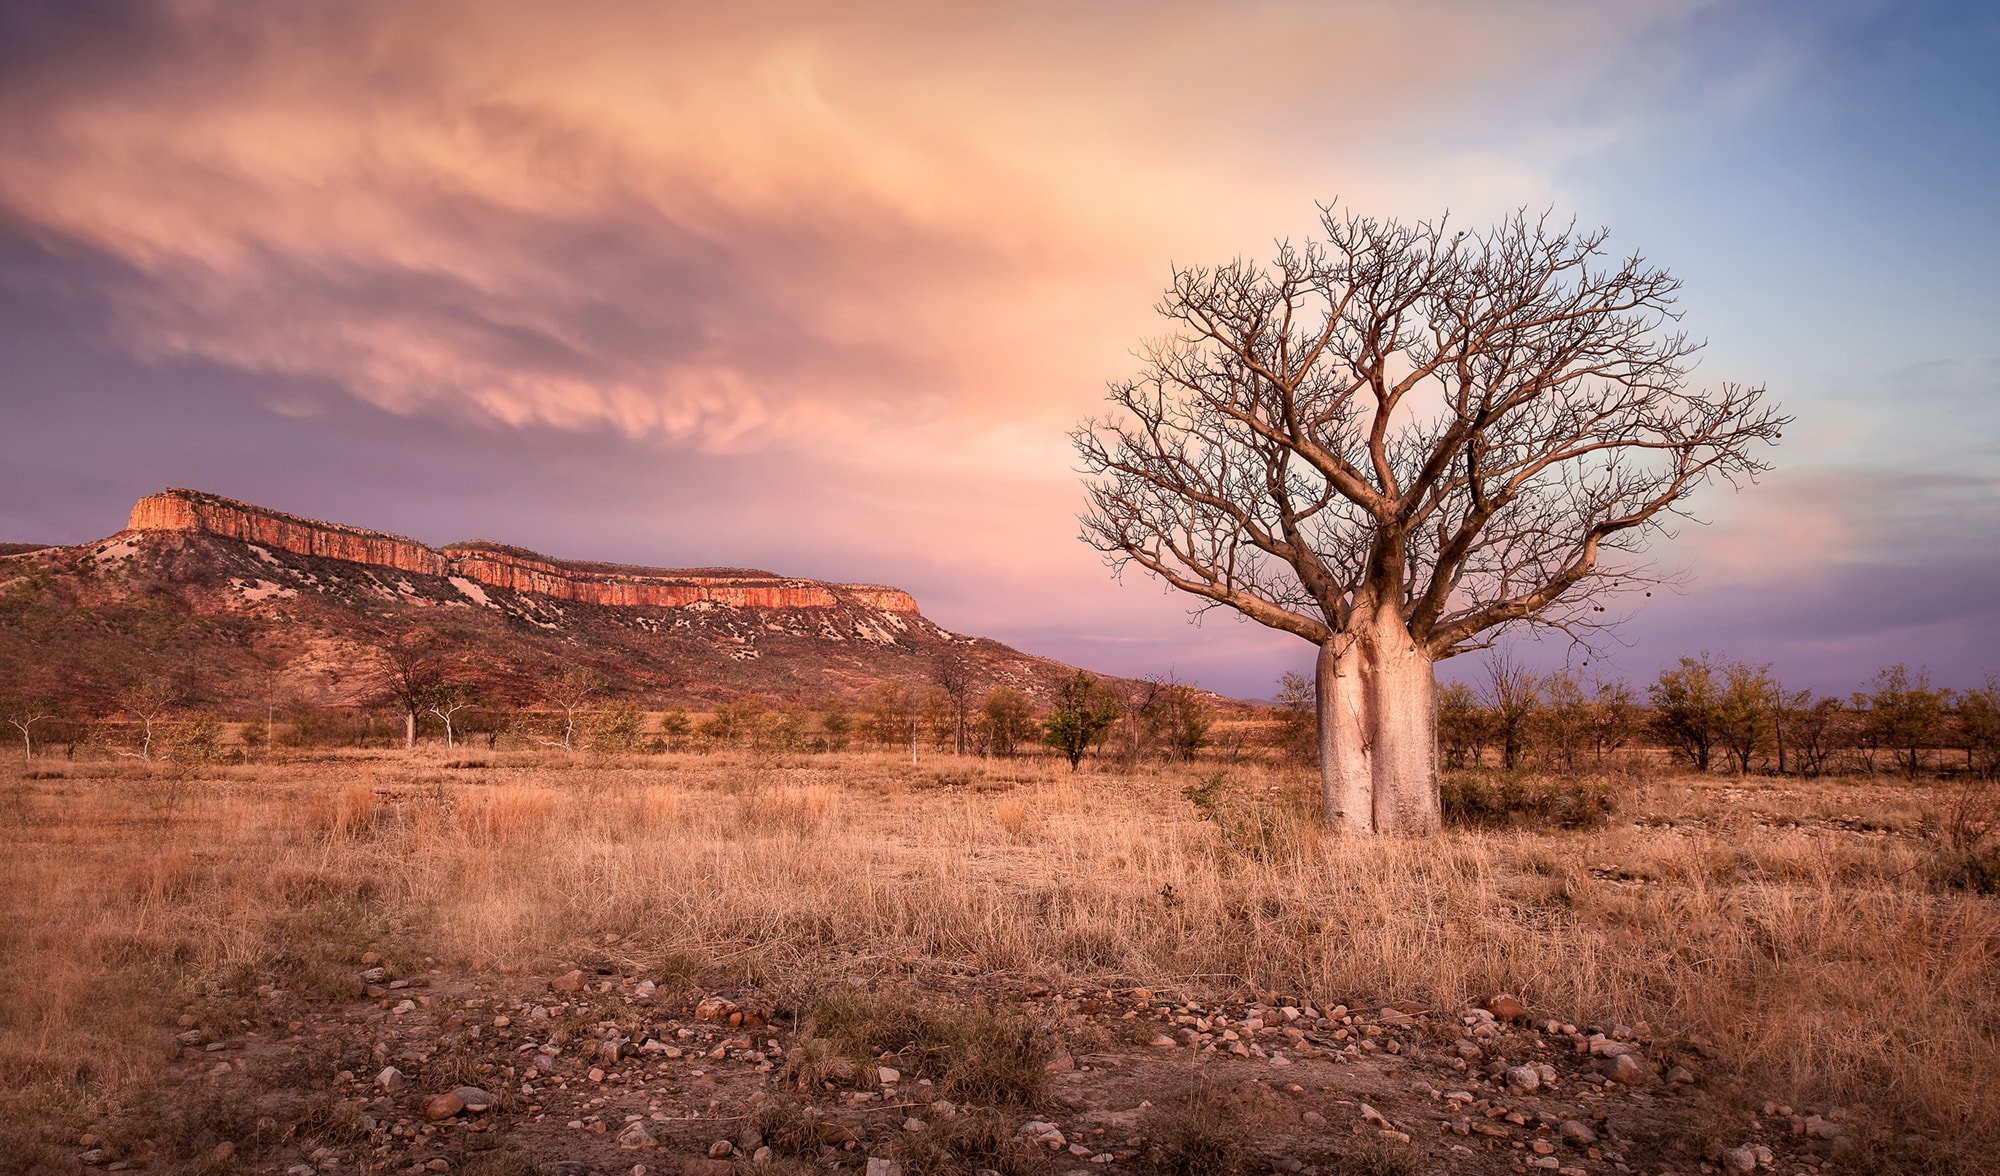 How did the iconic boab tree get to Australia?